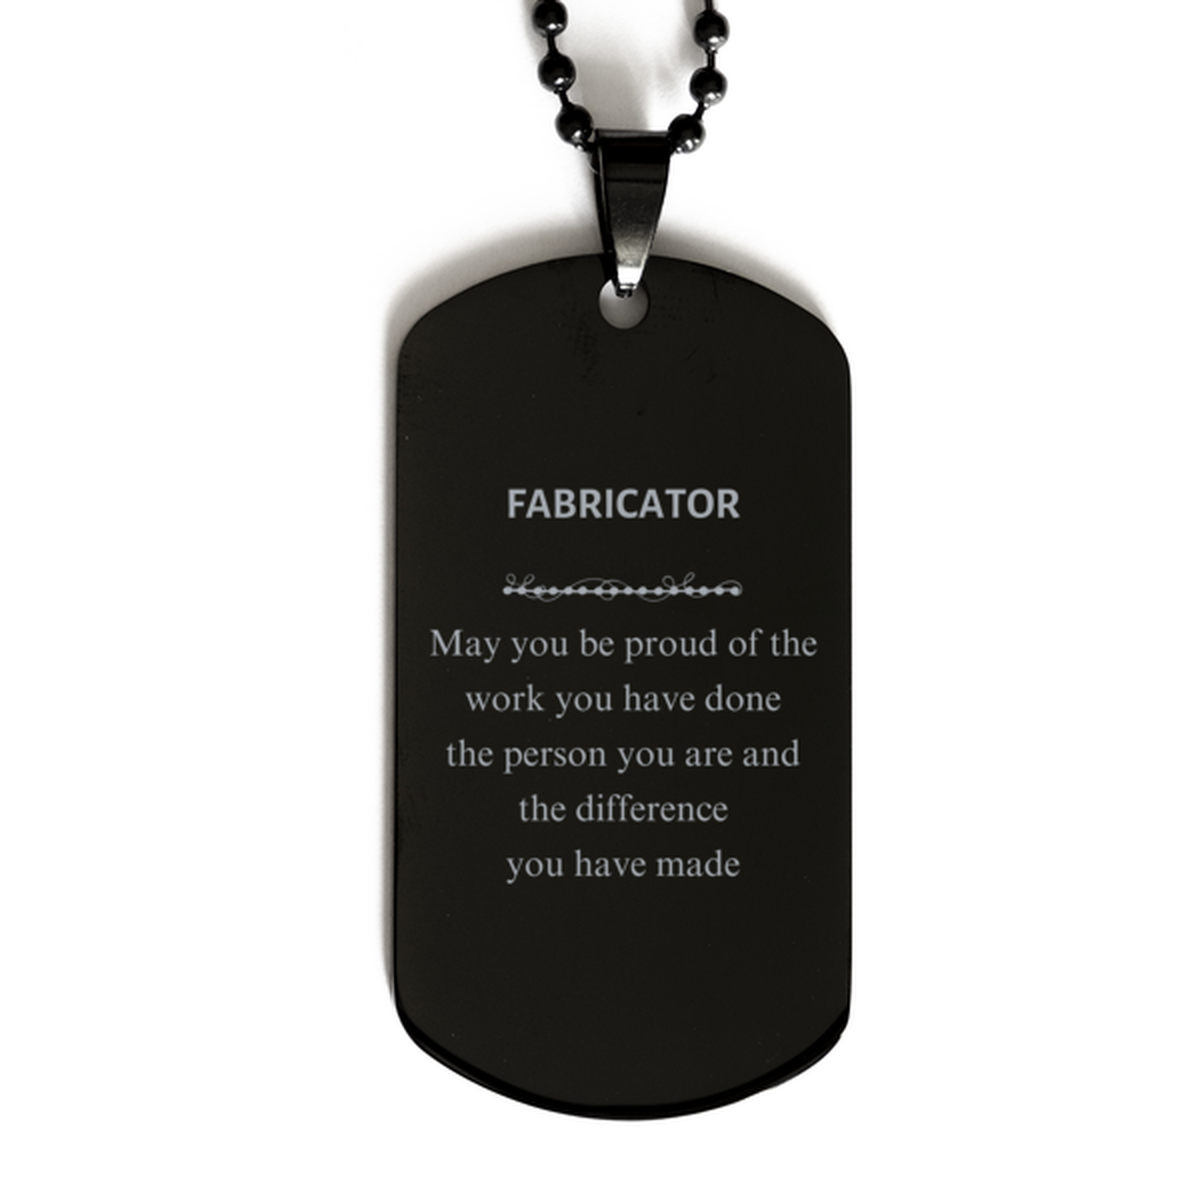 Fabricator May you be proud of the work you have done, Retirement Fabricator Black Dog Tag for Colleague Appreciation Gifts Amazing for Fabricator